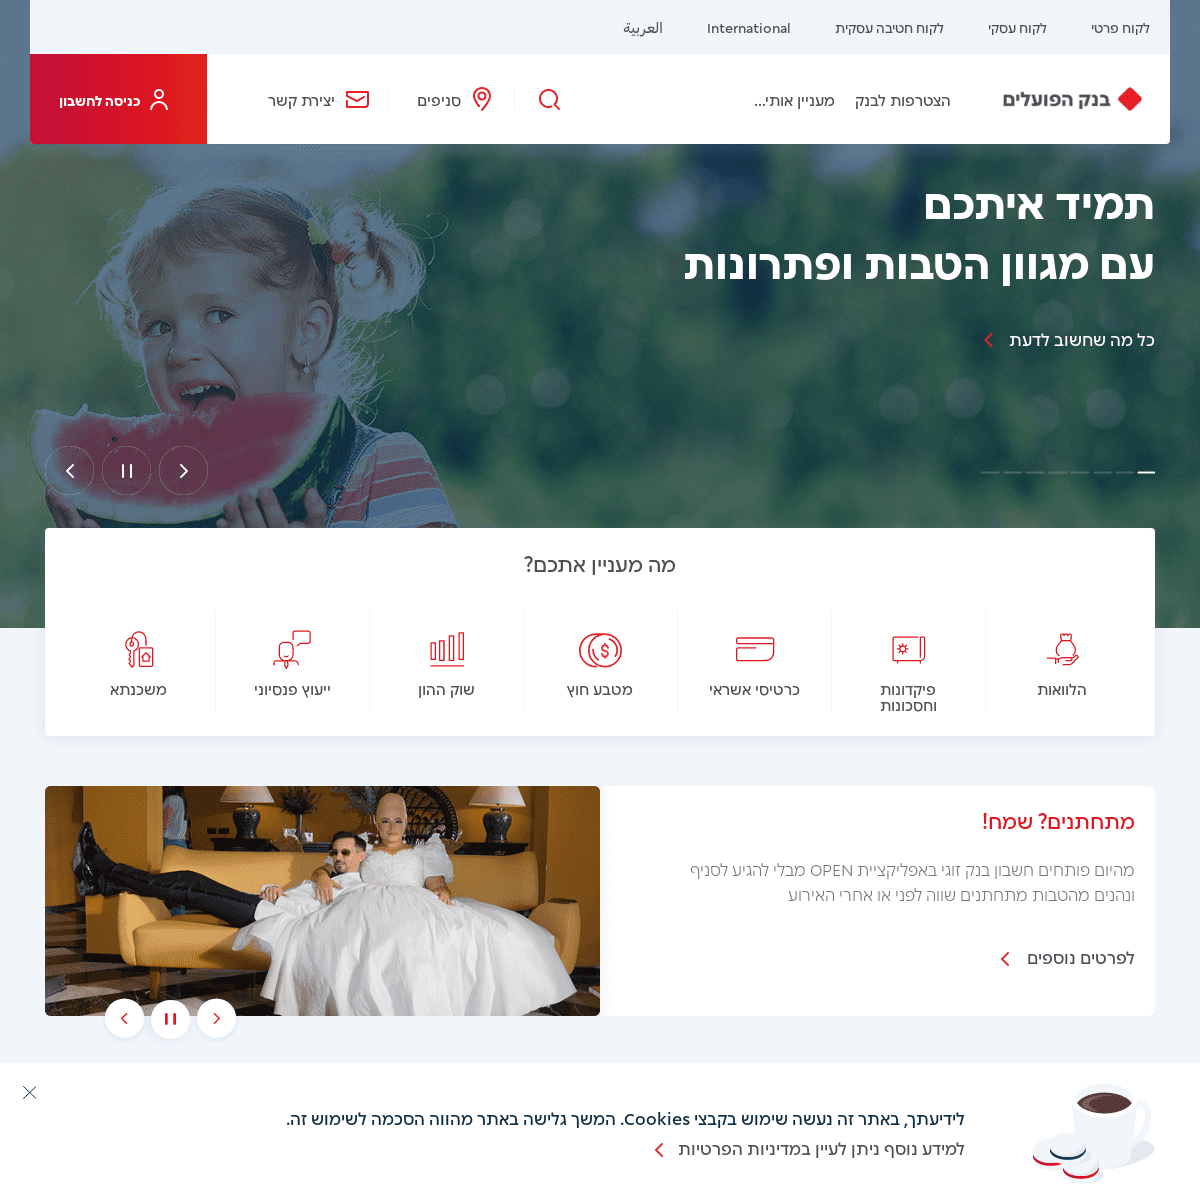 A complete backup of https://bankhapoalim.co.il